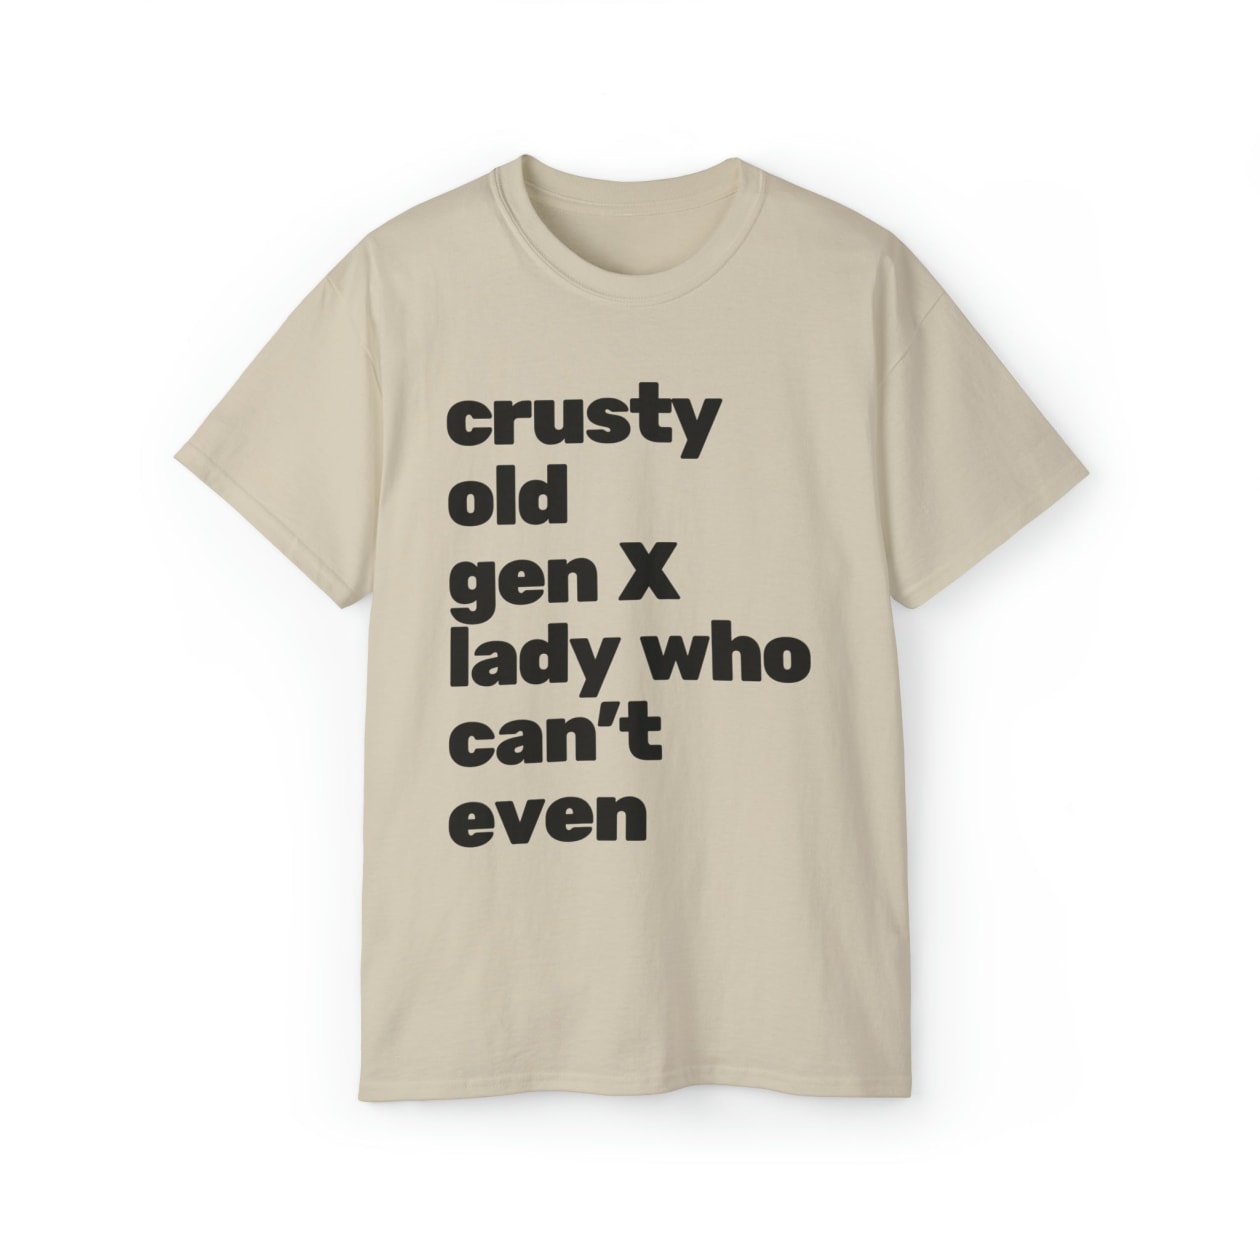 Crusty Old Gen X Lady Who Can't Even Ultra Cotton Tee Shirt | Multiple Colors | Sizes to 5X